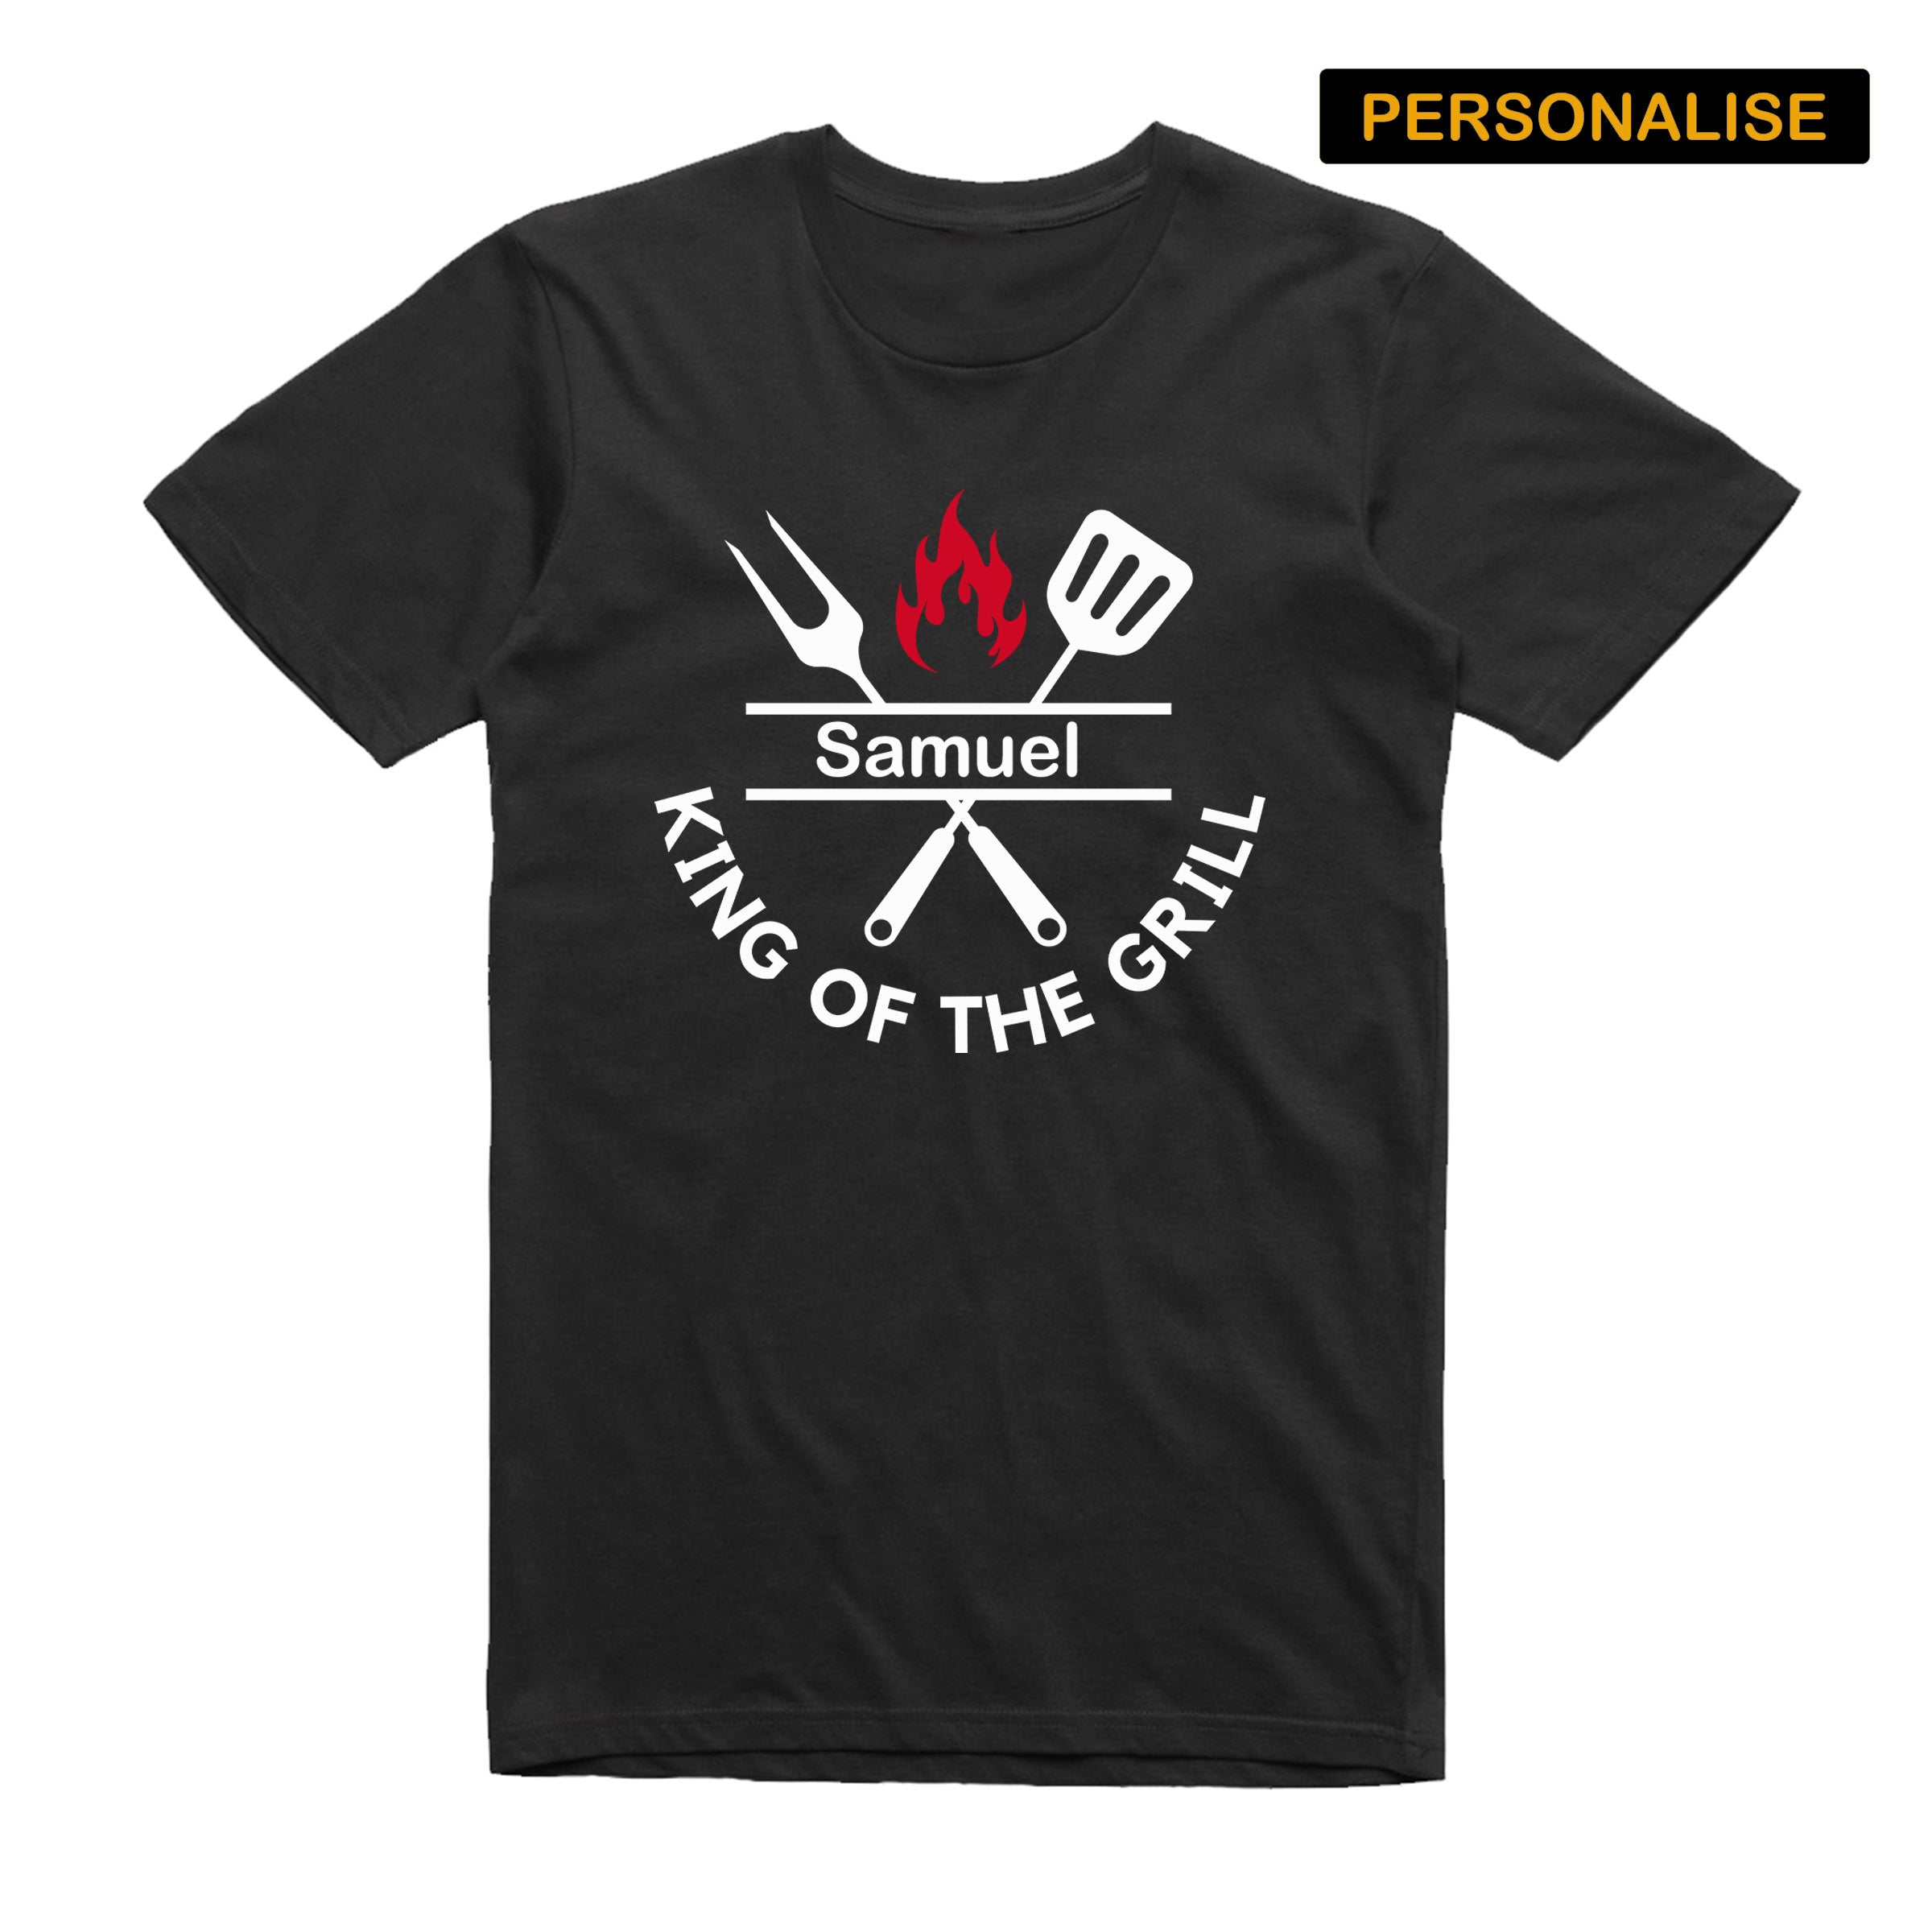 KING OF THE GRILL TSHIRT